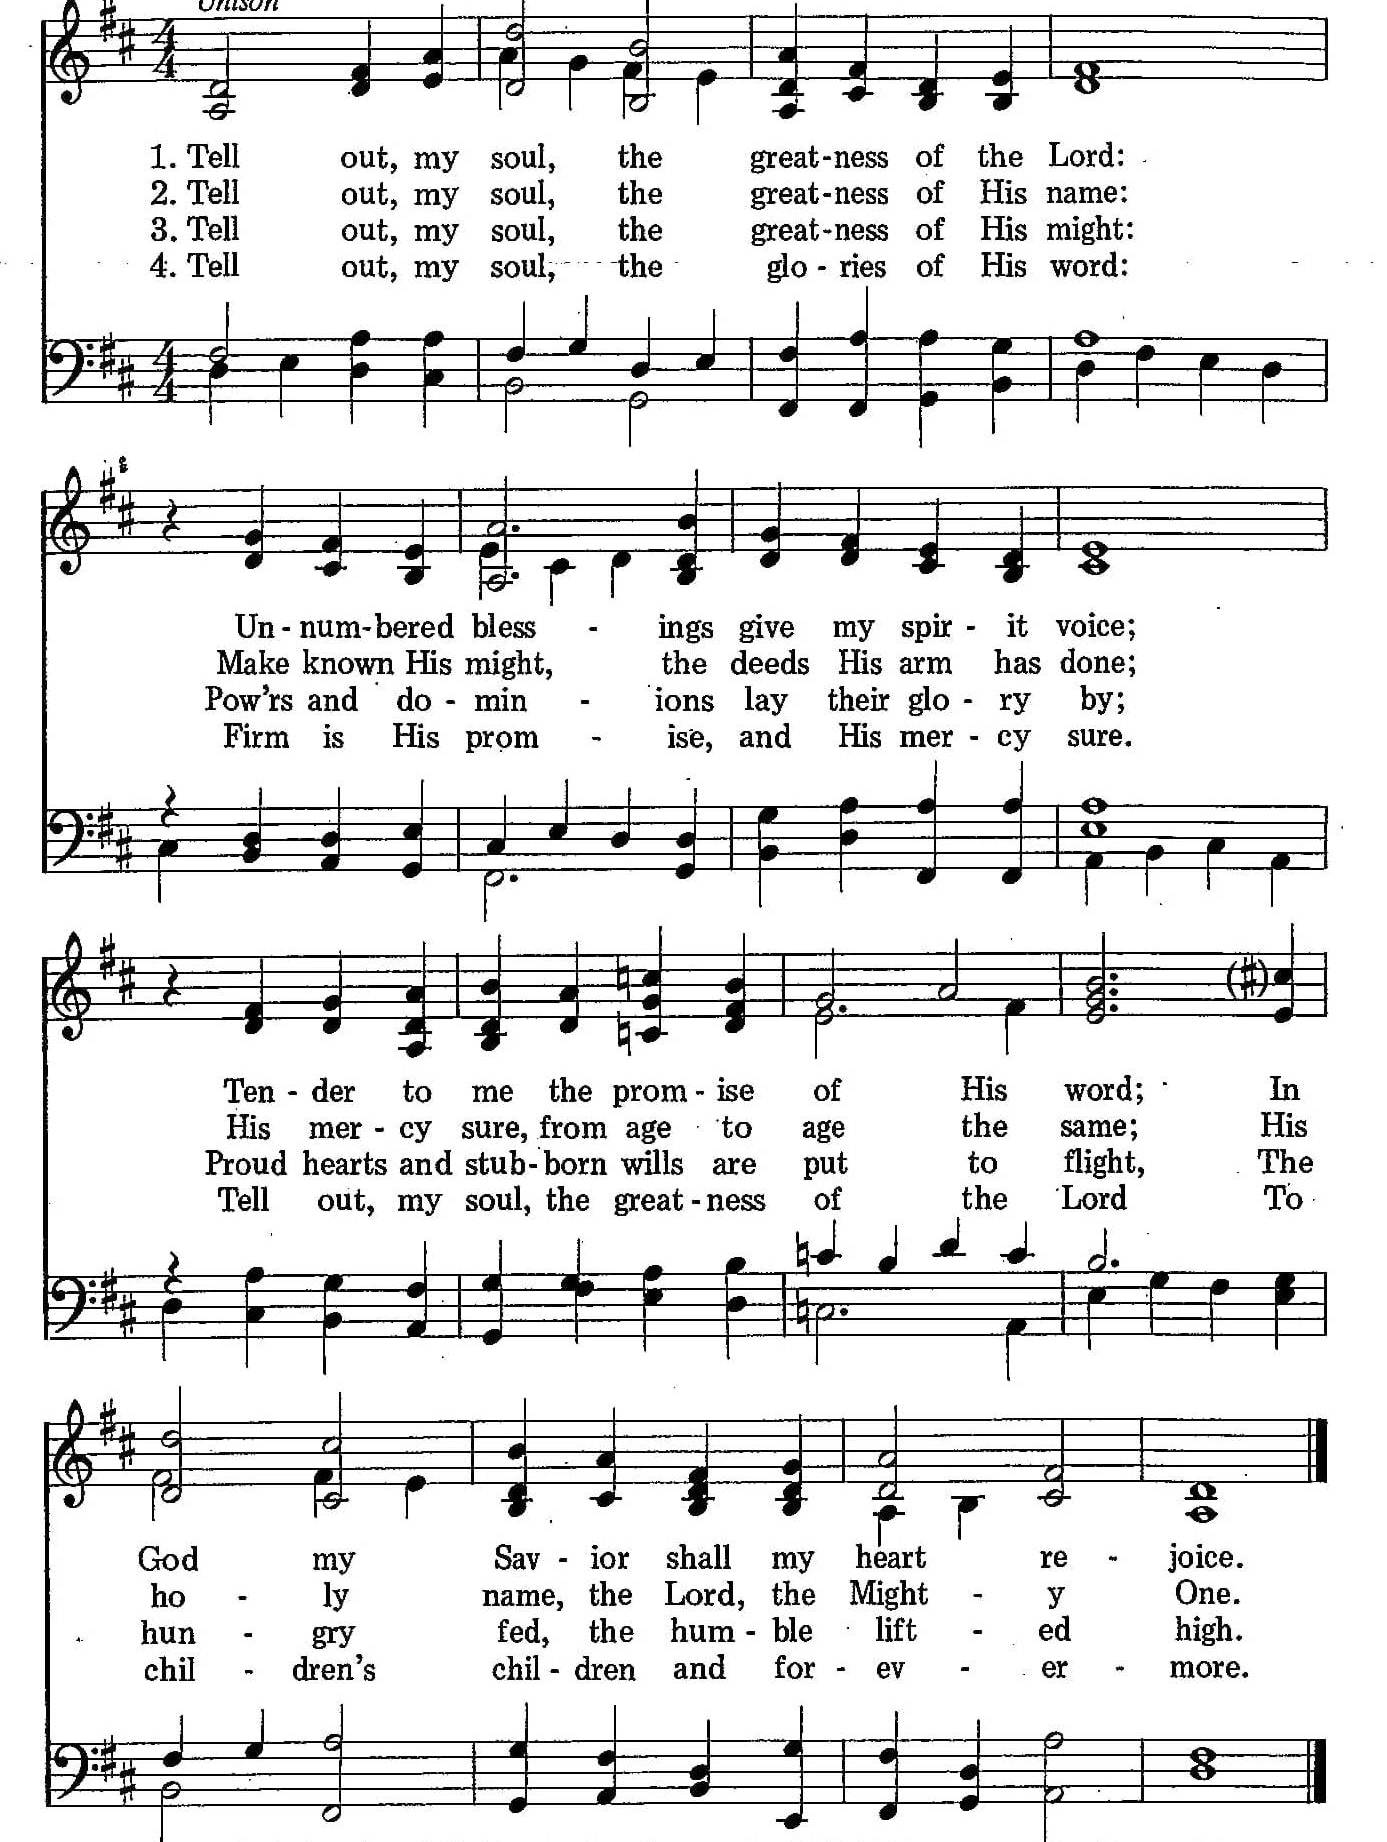 031 – Tell Out, My Soul sheet music